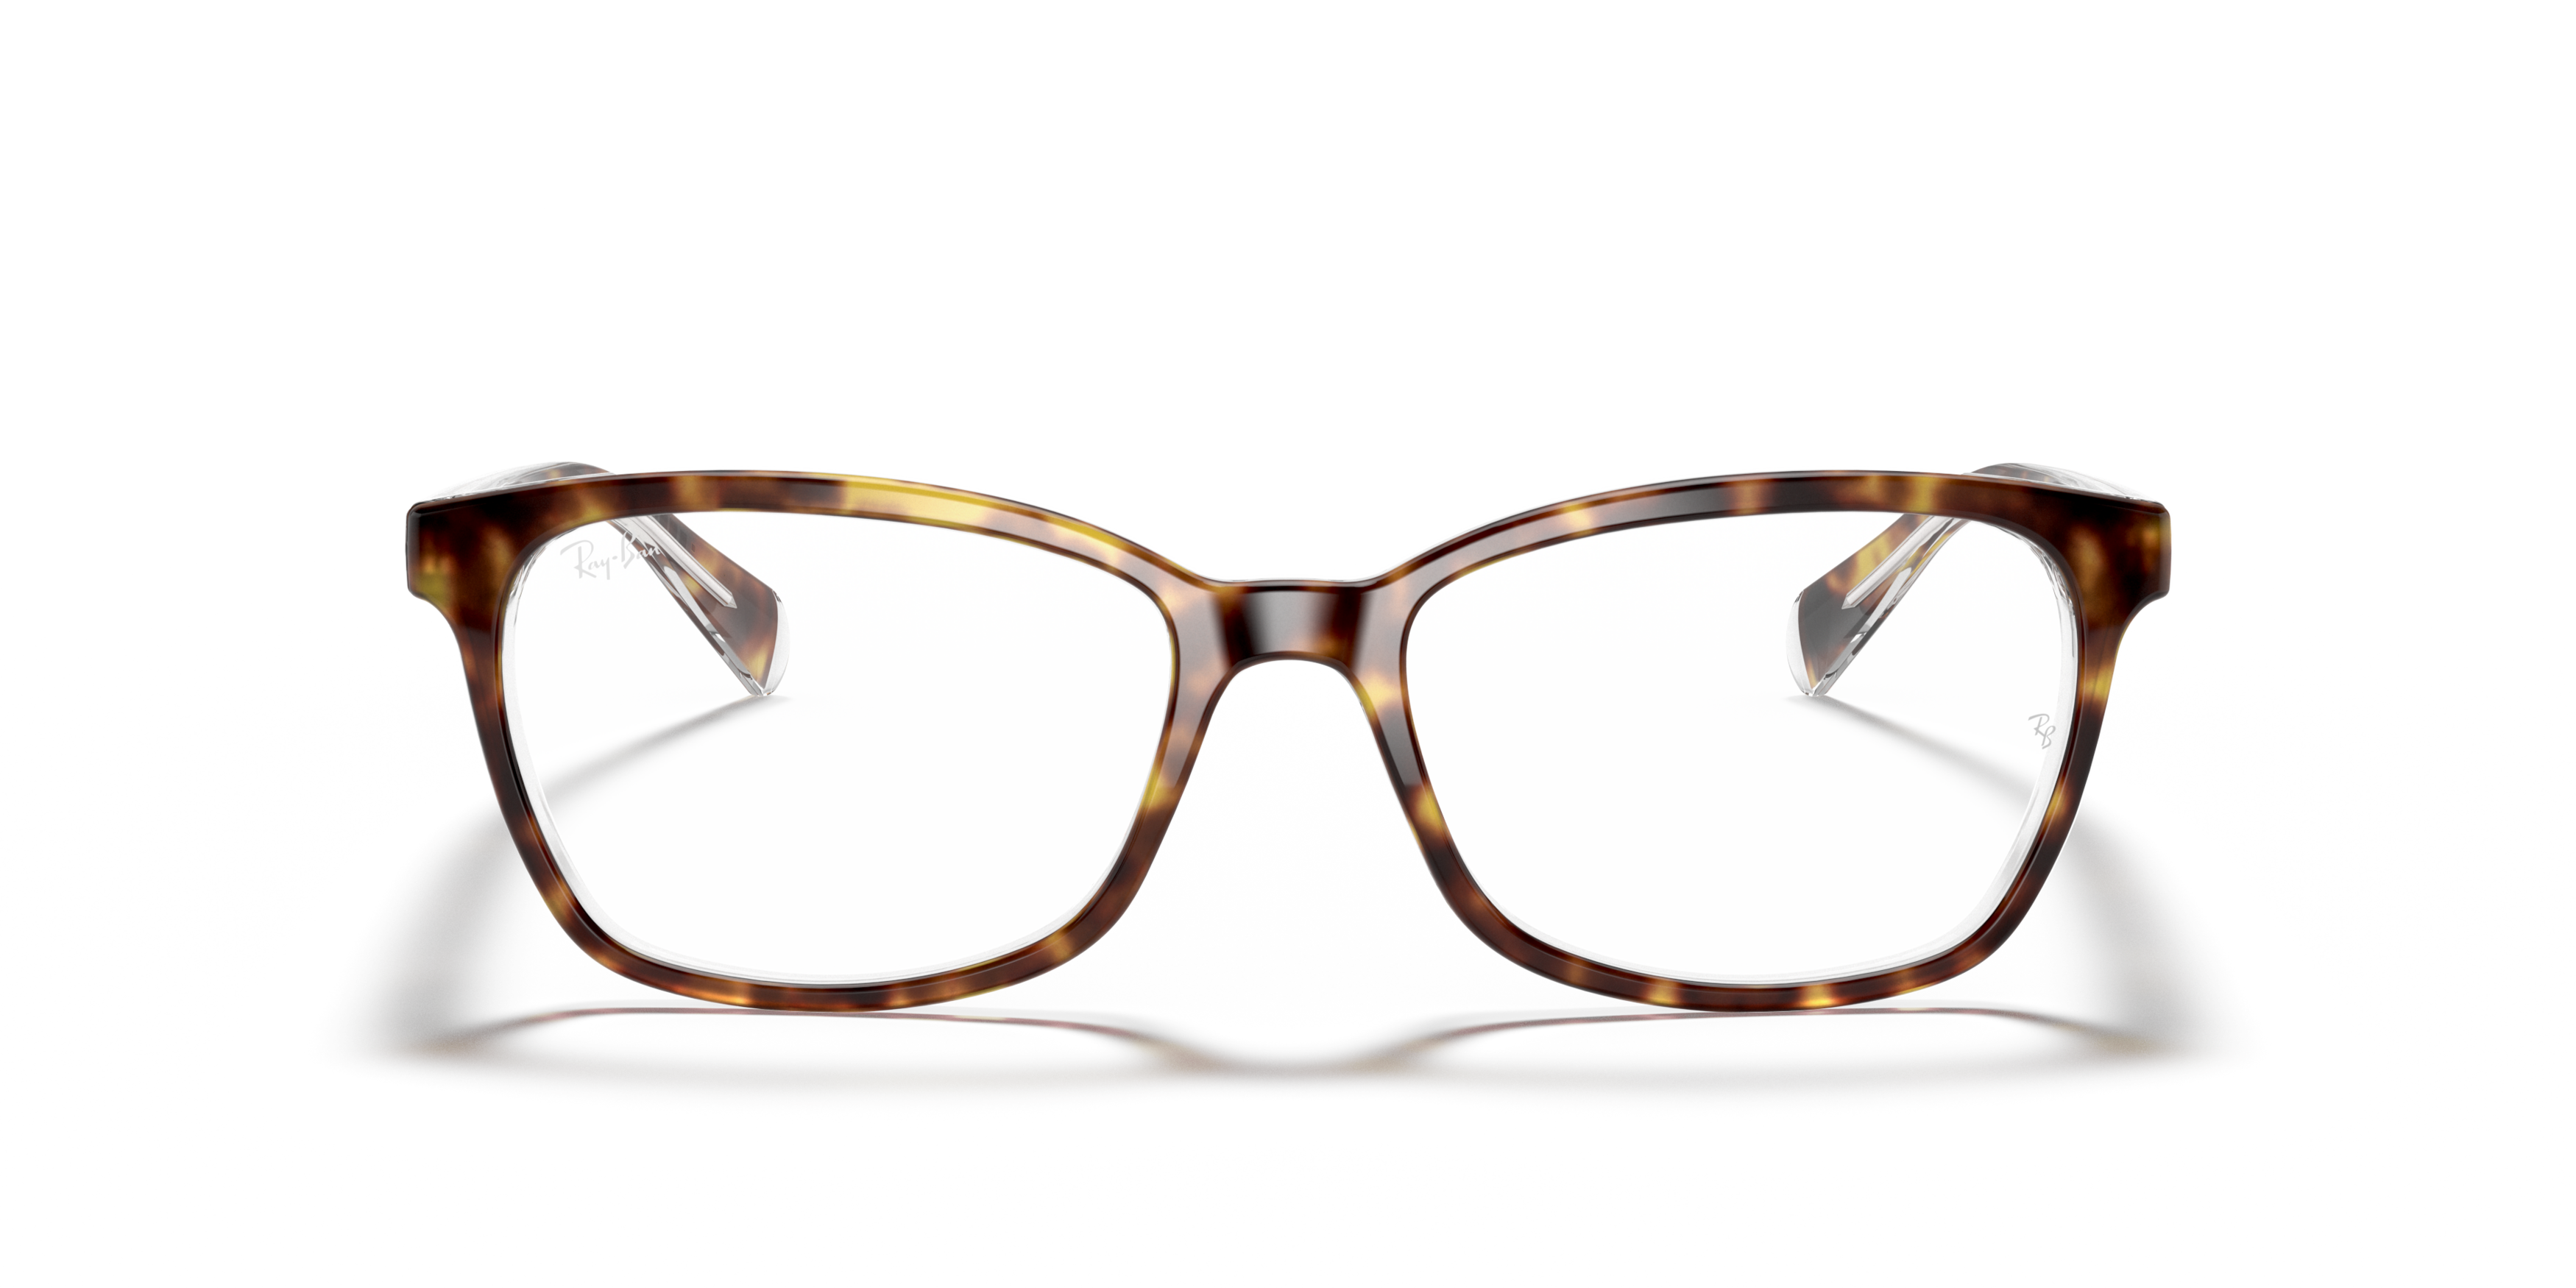 Front Ray-Ban RX 5362 (5082) Glasses Transparent / Tortoise Shell